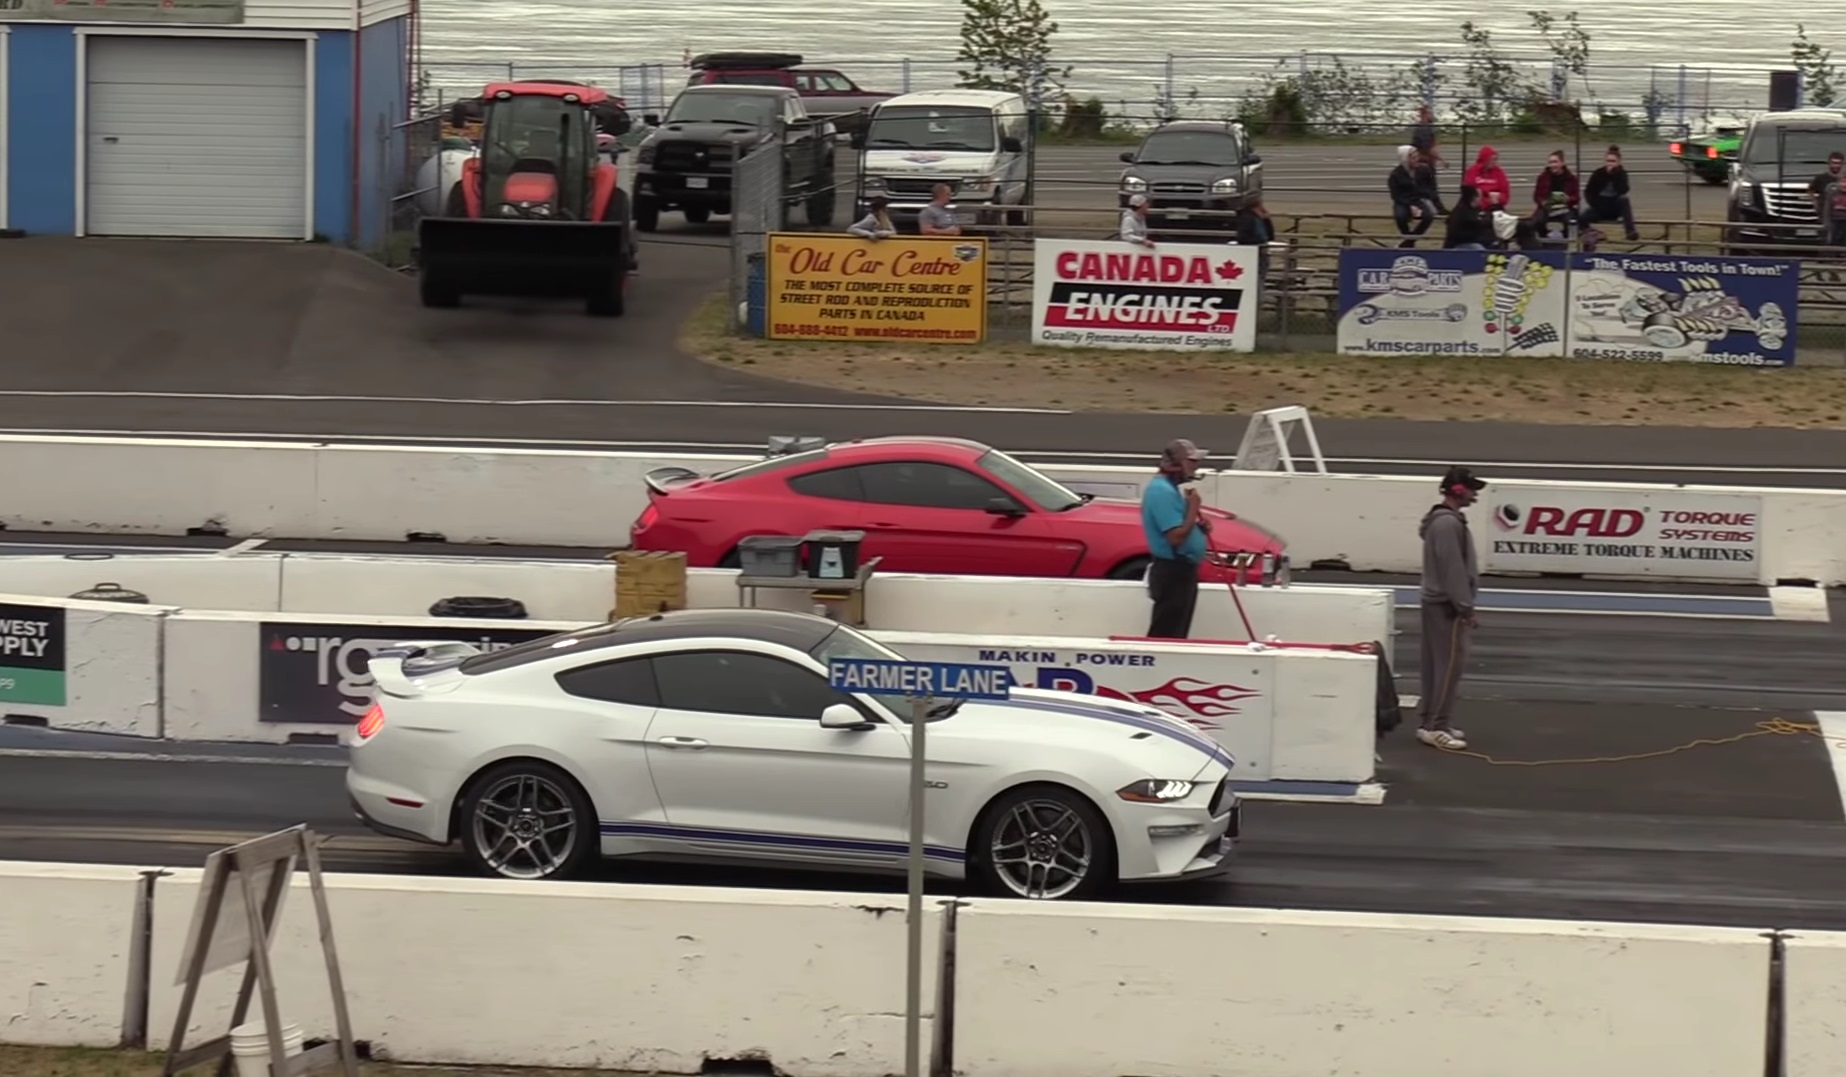 Video: 2018 Ford Mustang Shelby GT350 vs 2018 Mustang GT - 1/4 Mile Drag Race